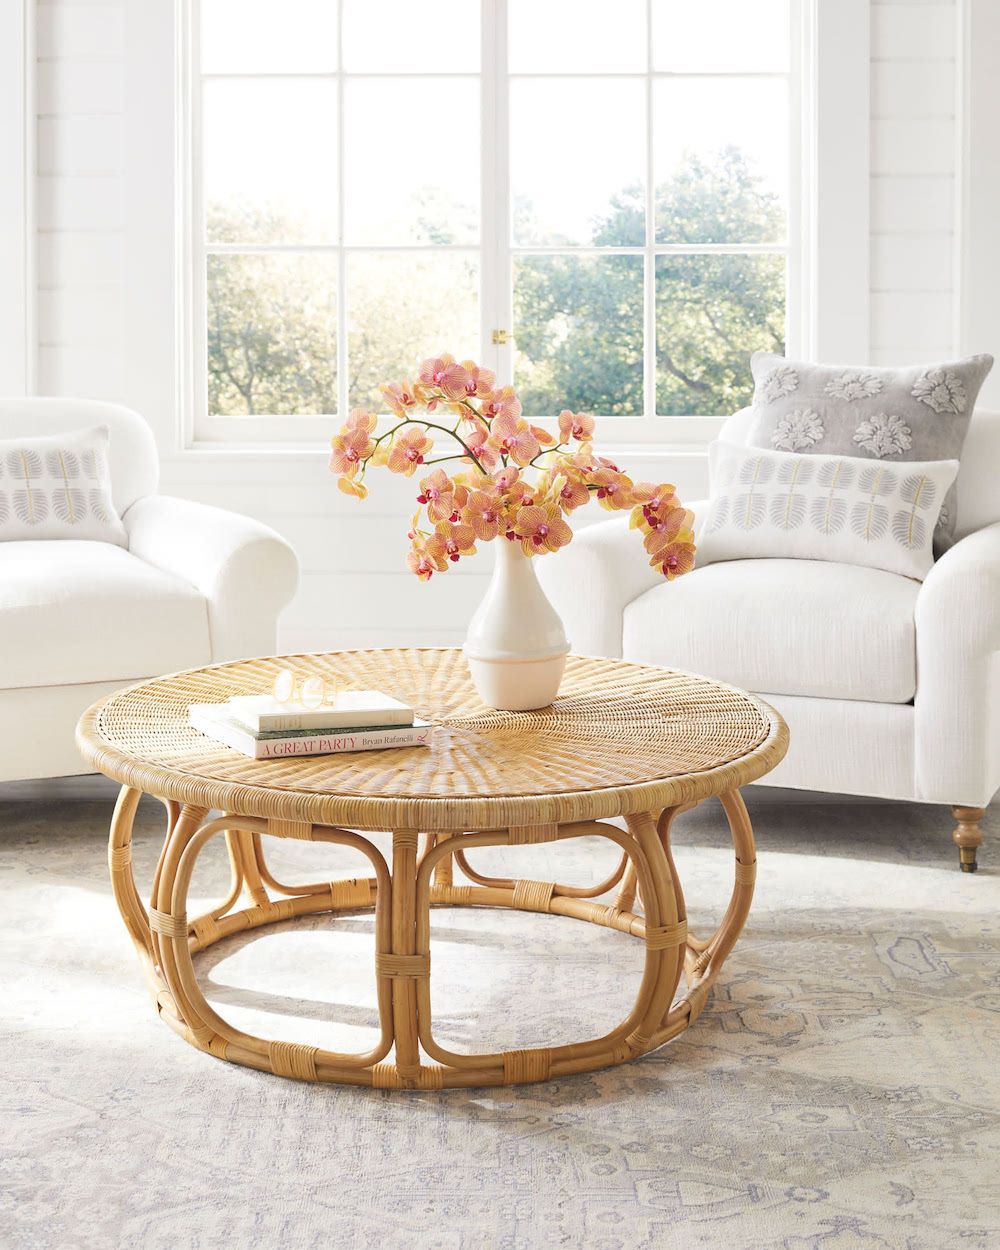 24 Rattan Coffee Tables For The Summer Home Pertaining To Rattan Coffee Tables (View 9 of 20)